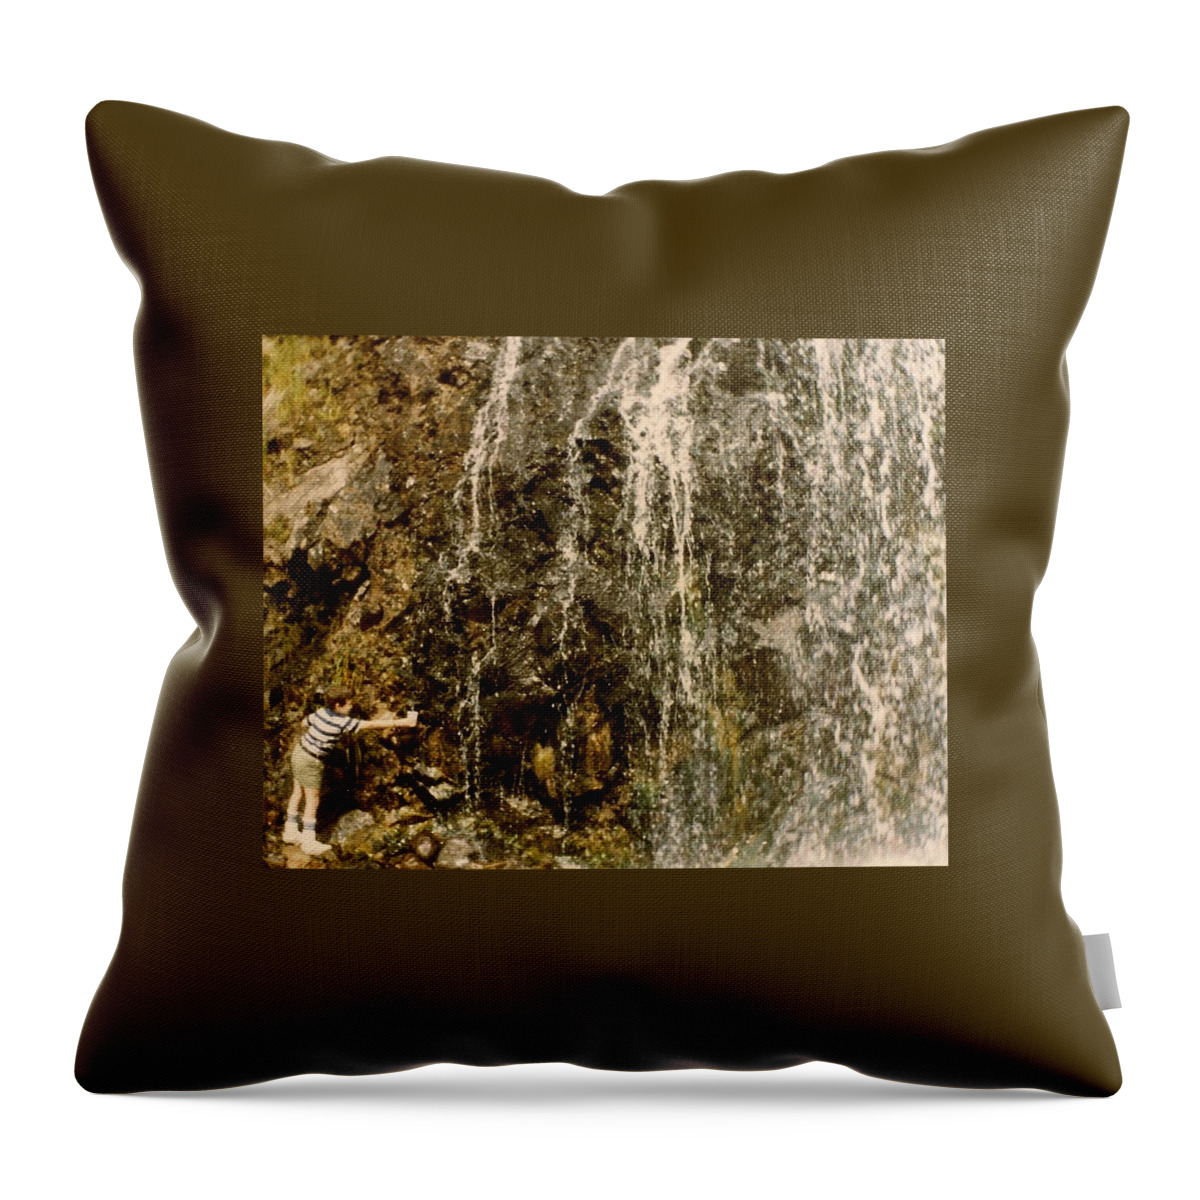 Waterfalls Throw Pillow featuring the photograph Thirsty by Chris W Photography AKA Christian Wilson